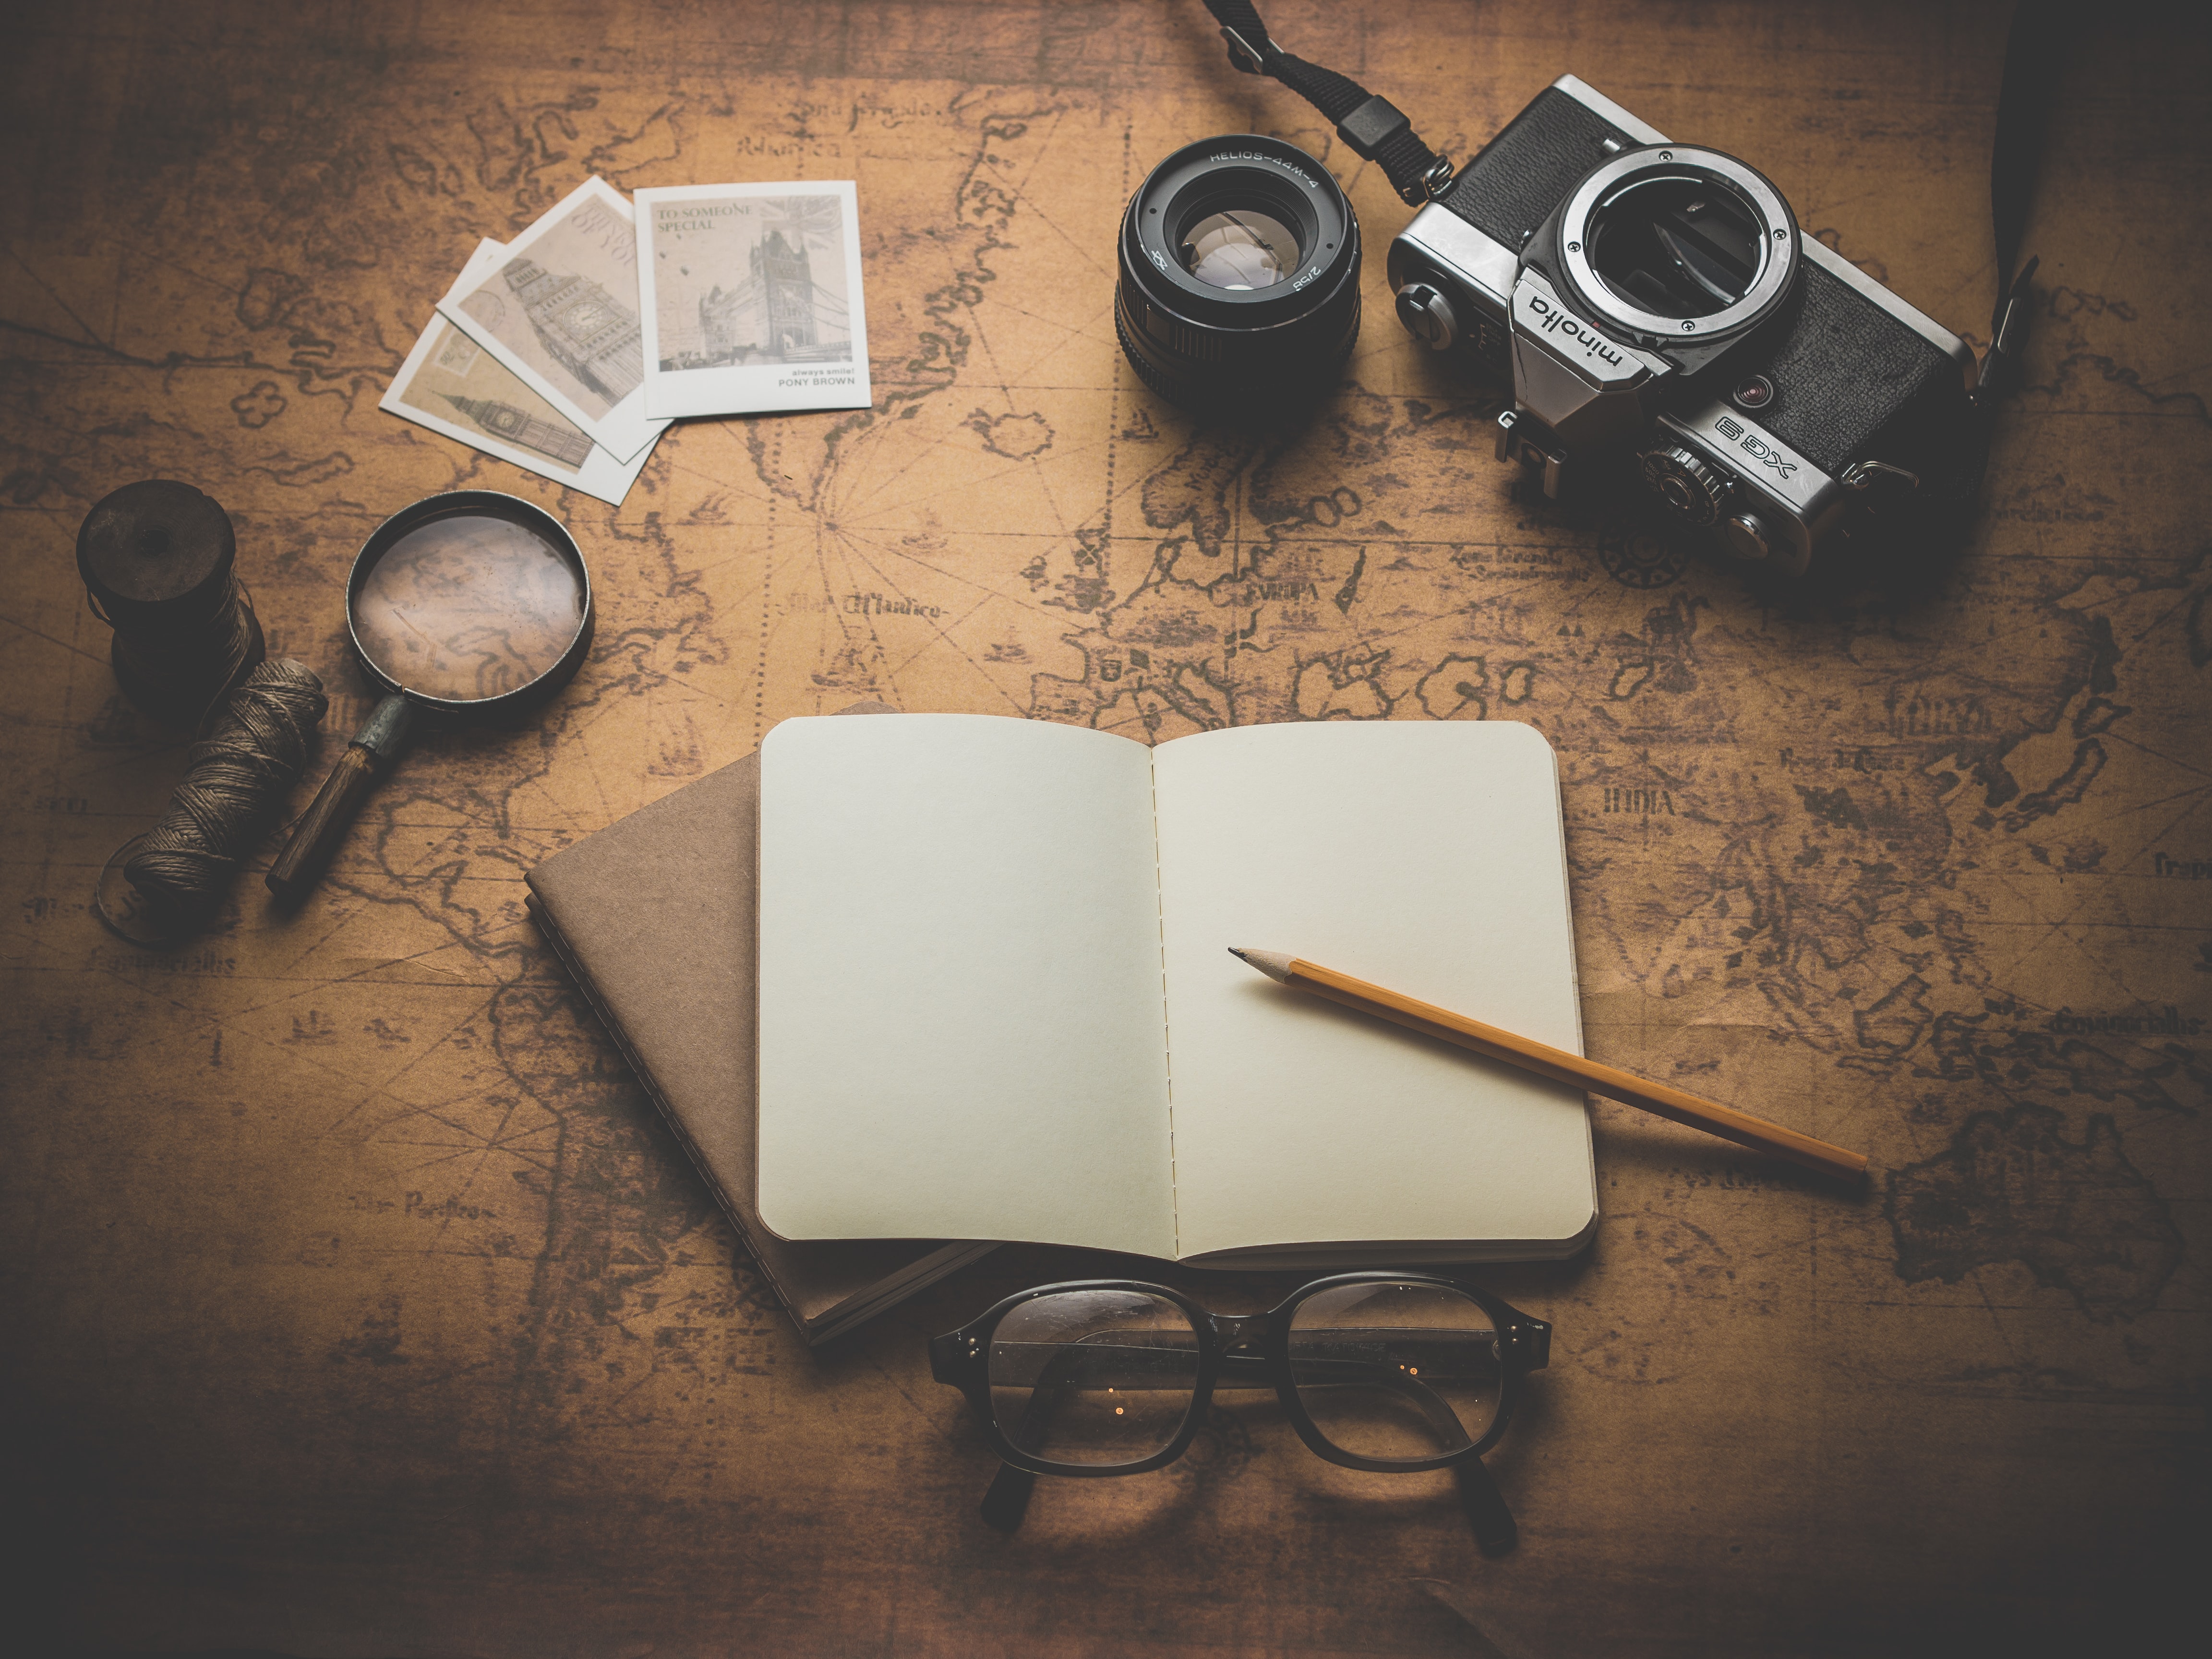 empty notebook, camera, map, magnifying glass